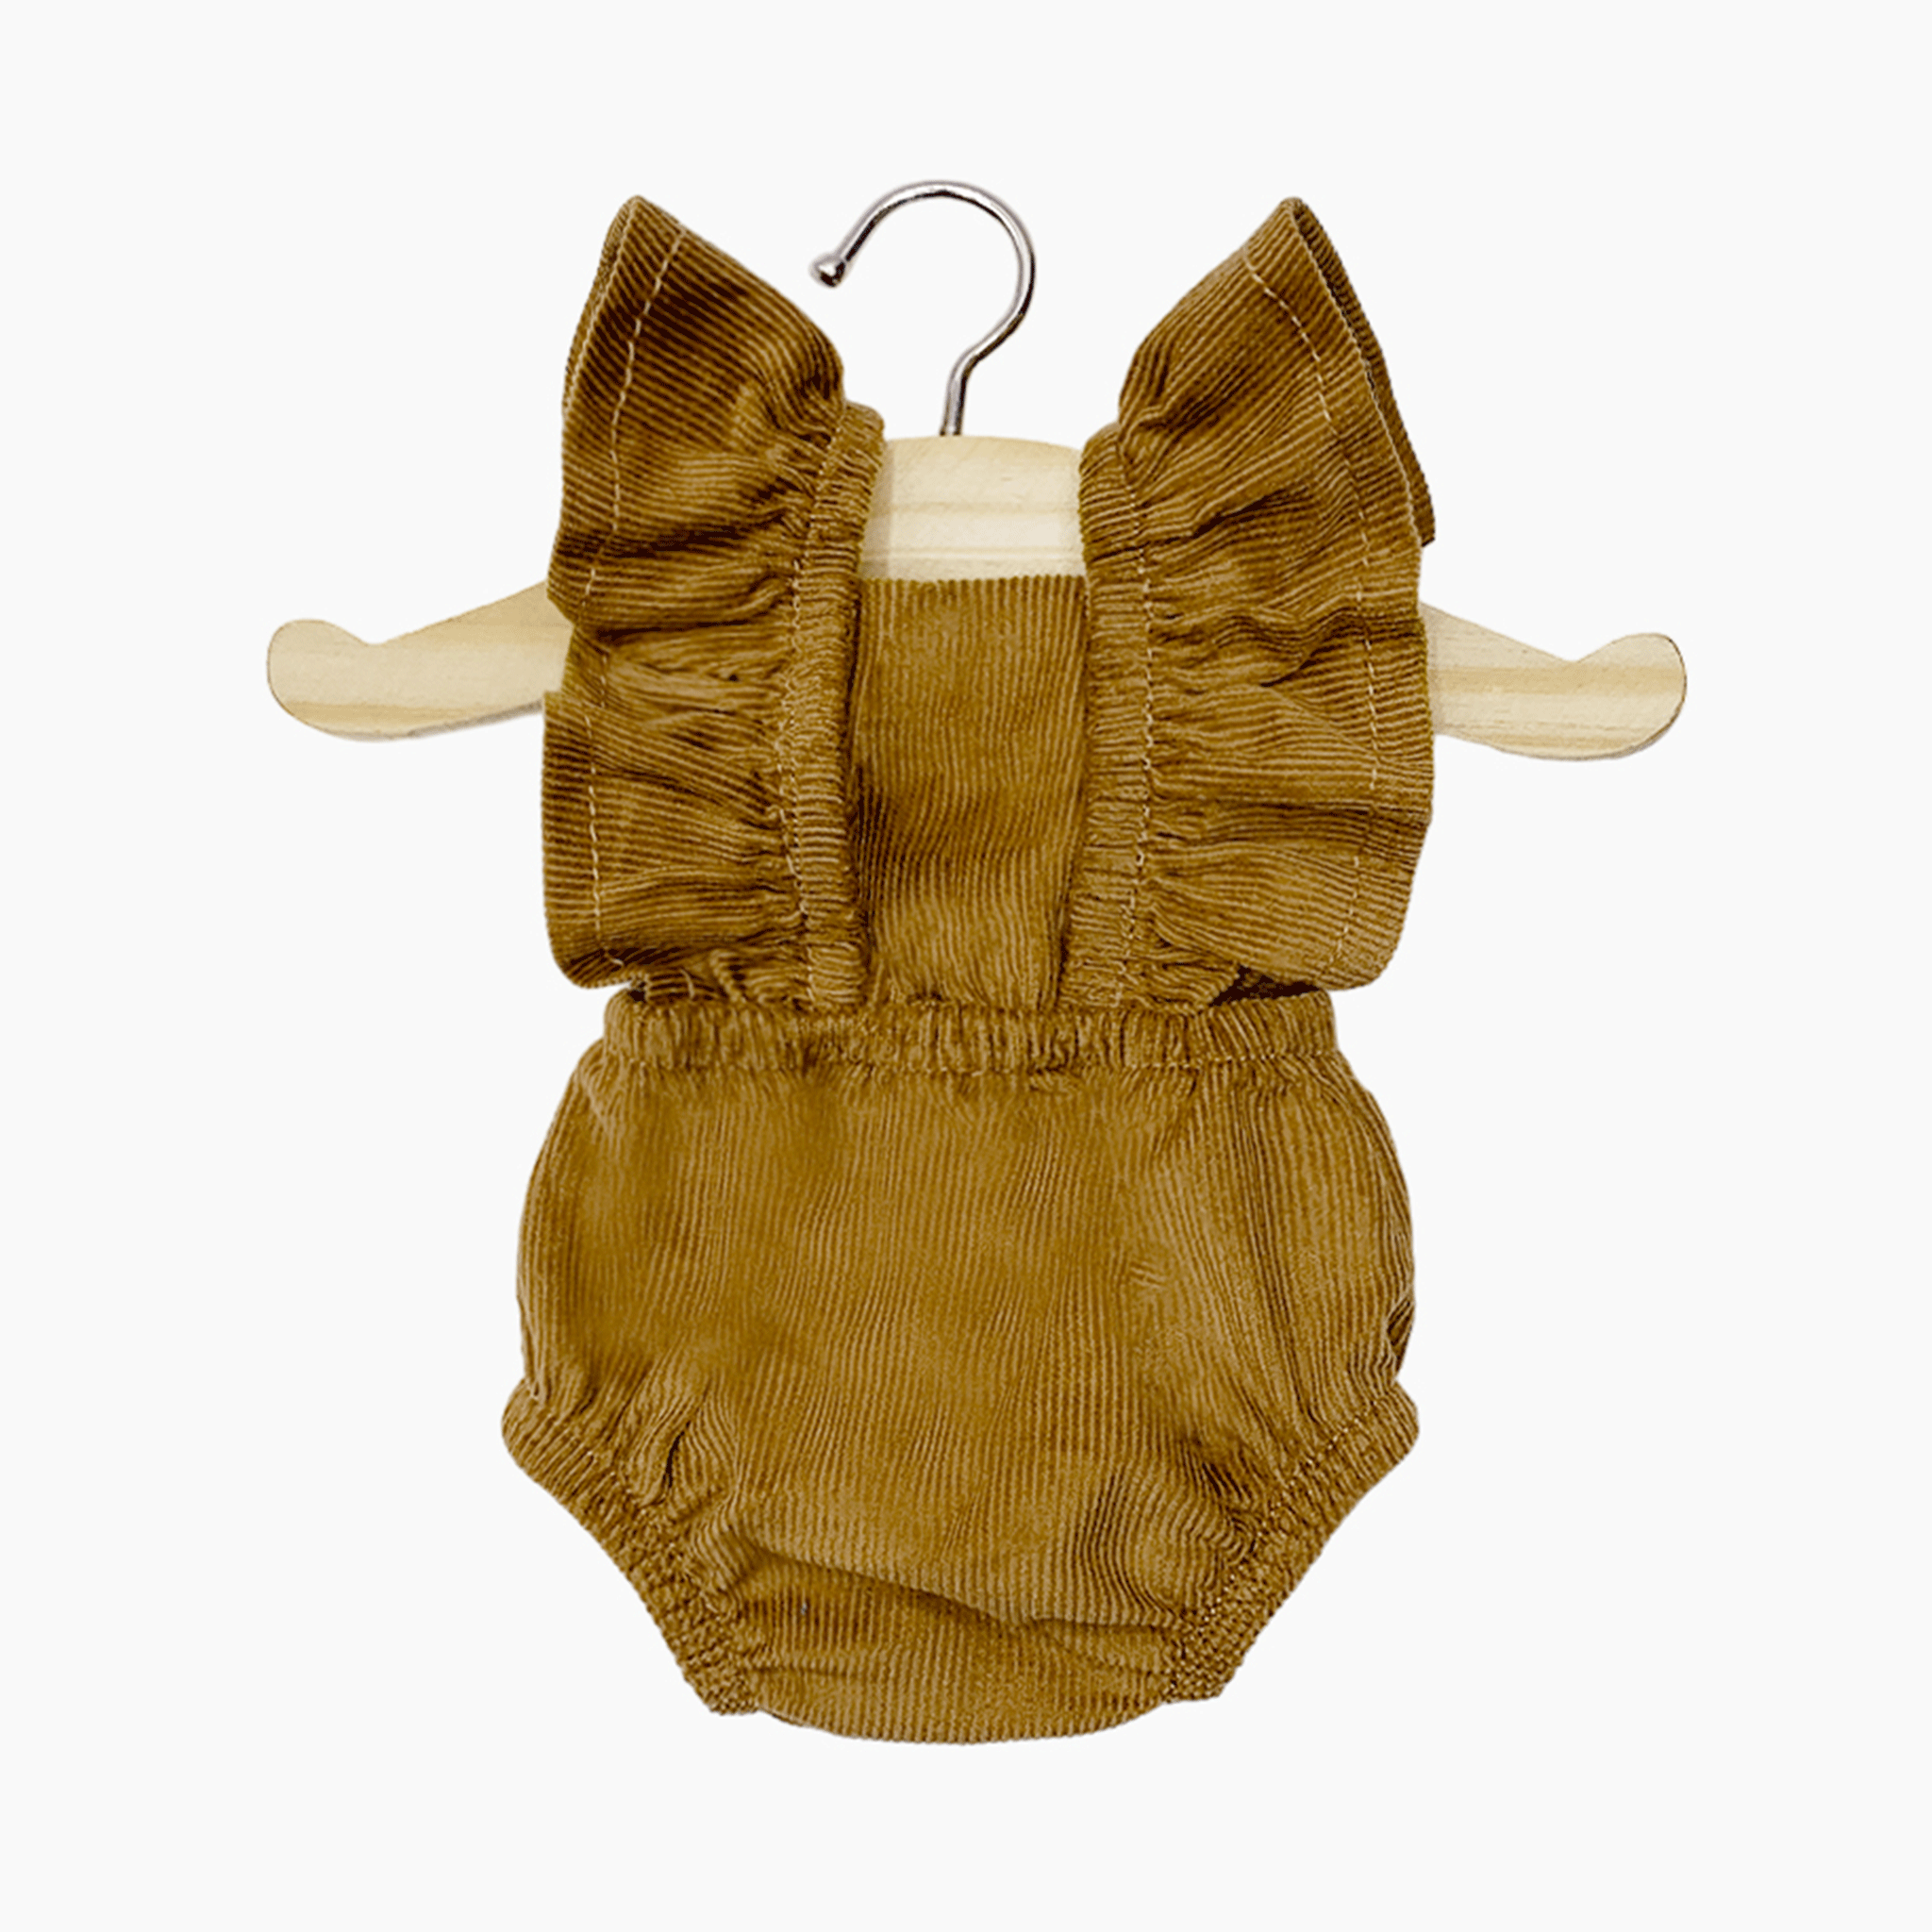 On a white background is a burnt mustard yellow toy doll romper with a corduroy texture and ruffle sleeves hanging on a hanger that is not included. 